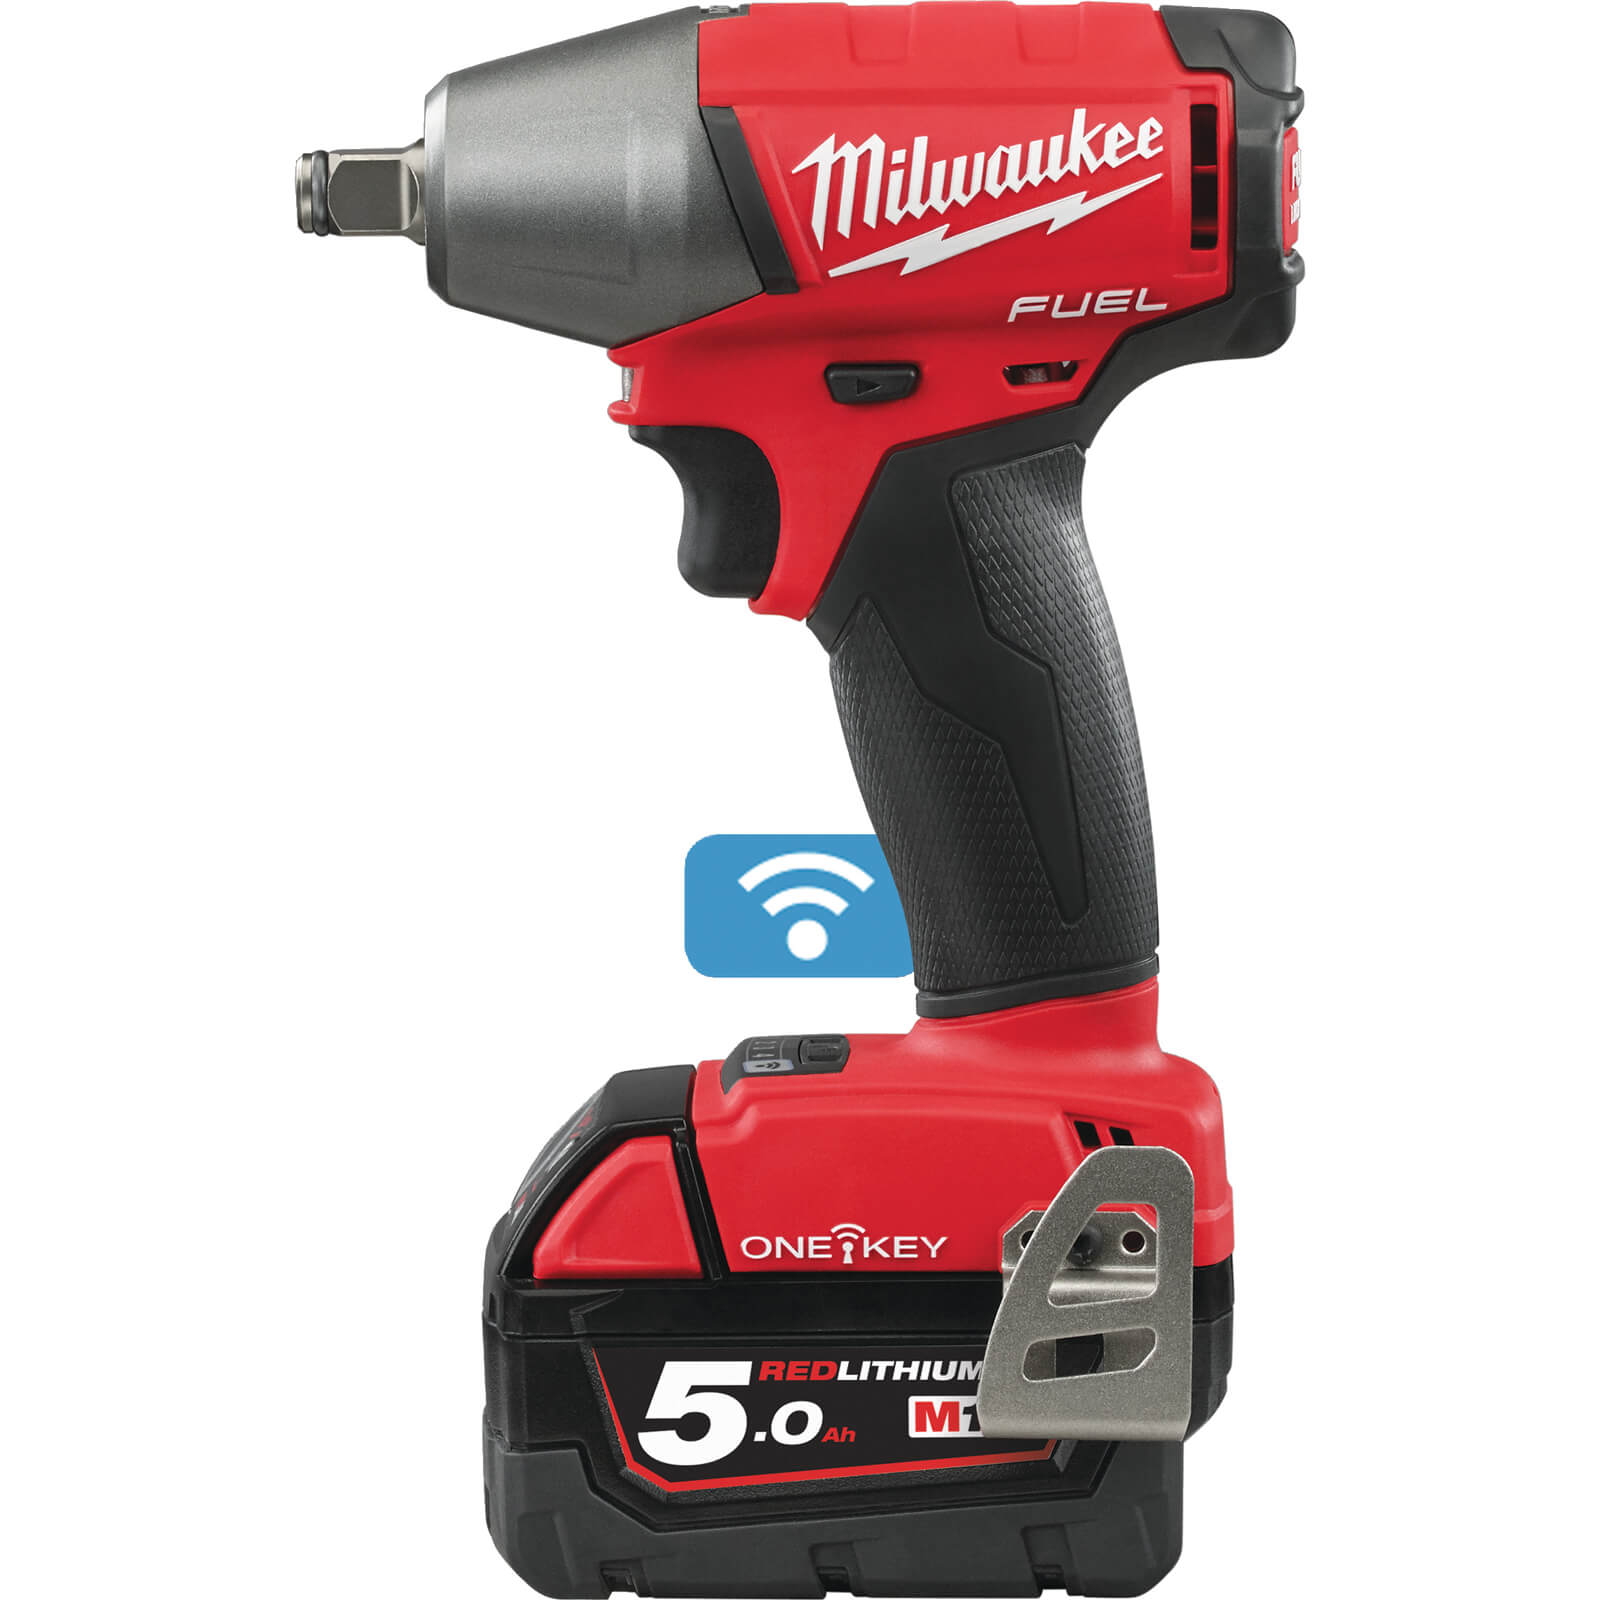 Image of Milwaukee M18 ONEIWF12 Fuel 18v Cordless Brushless 1/2" Drive Impact Wrench 2 x 5ah Li-ion Charger Case